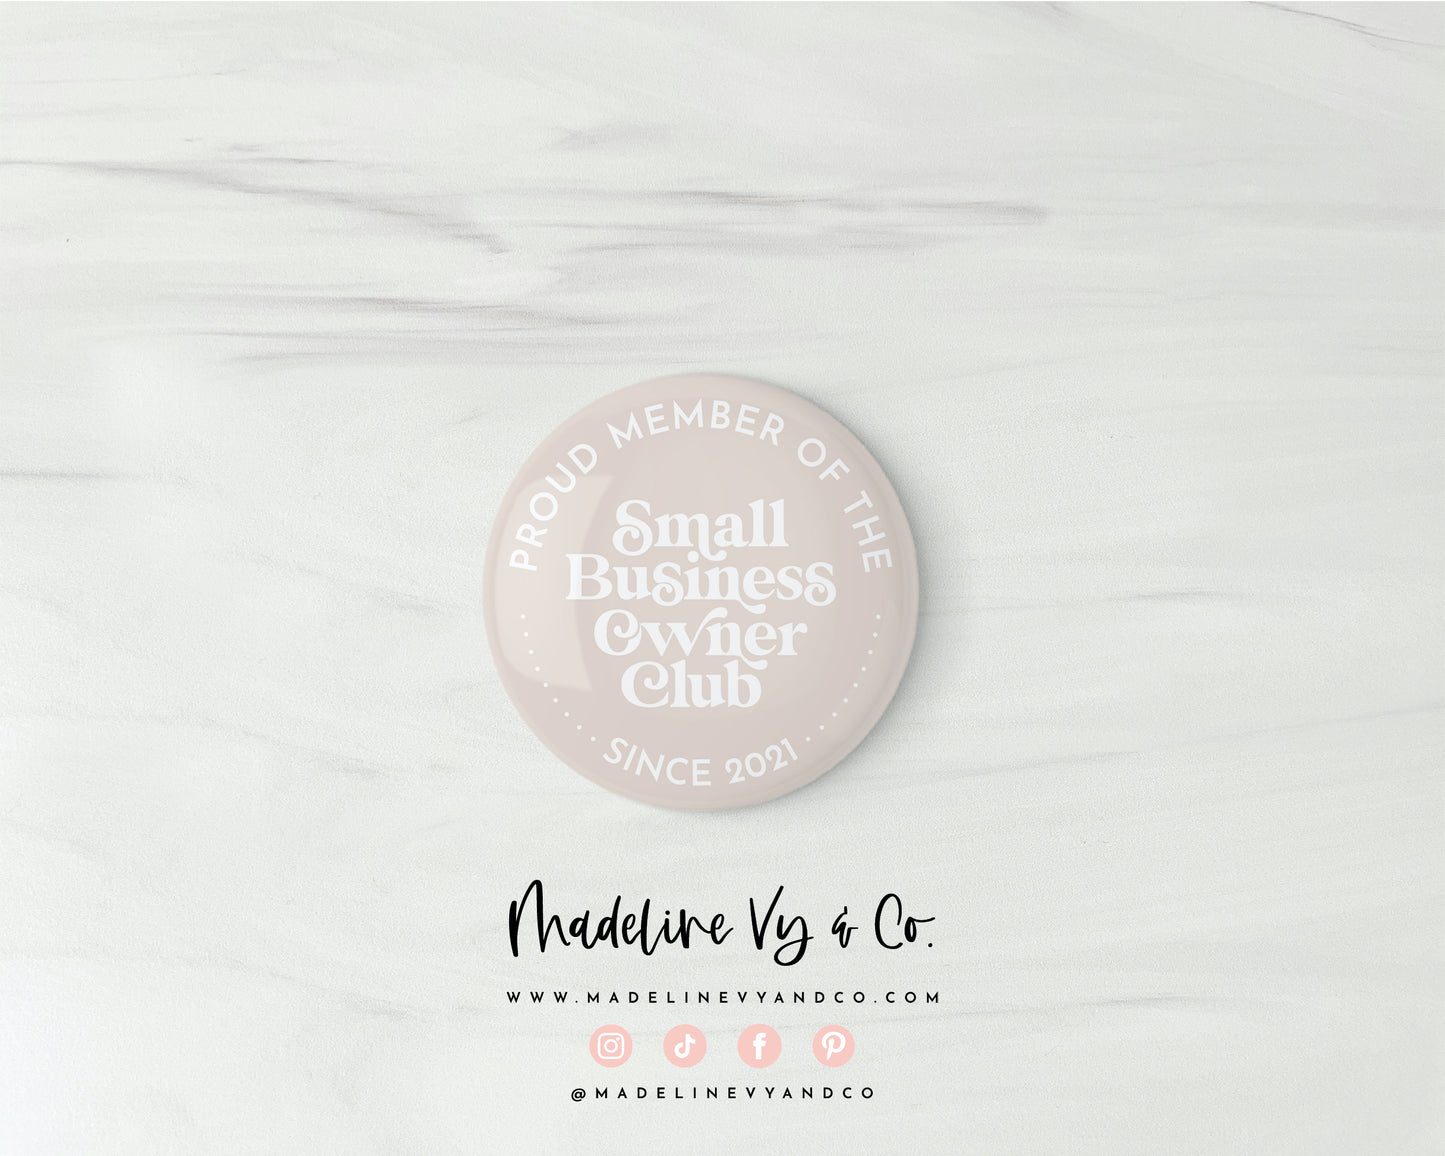 Small Business Owner Club Badge Pins, Magnets, Keychains